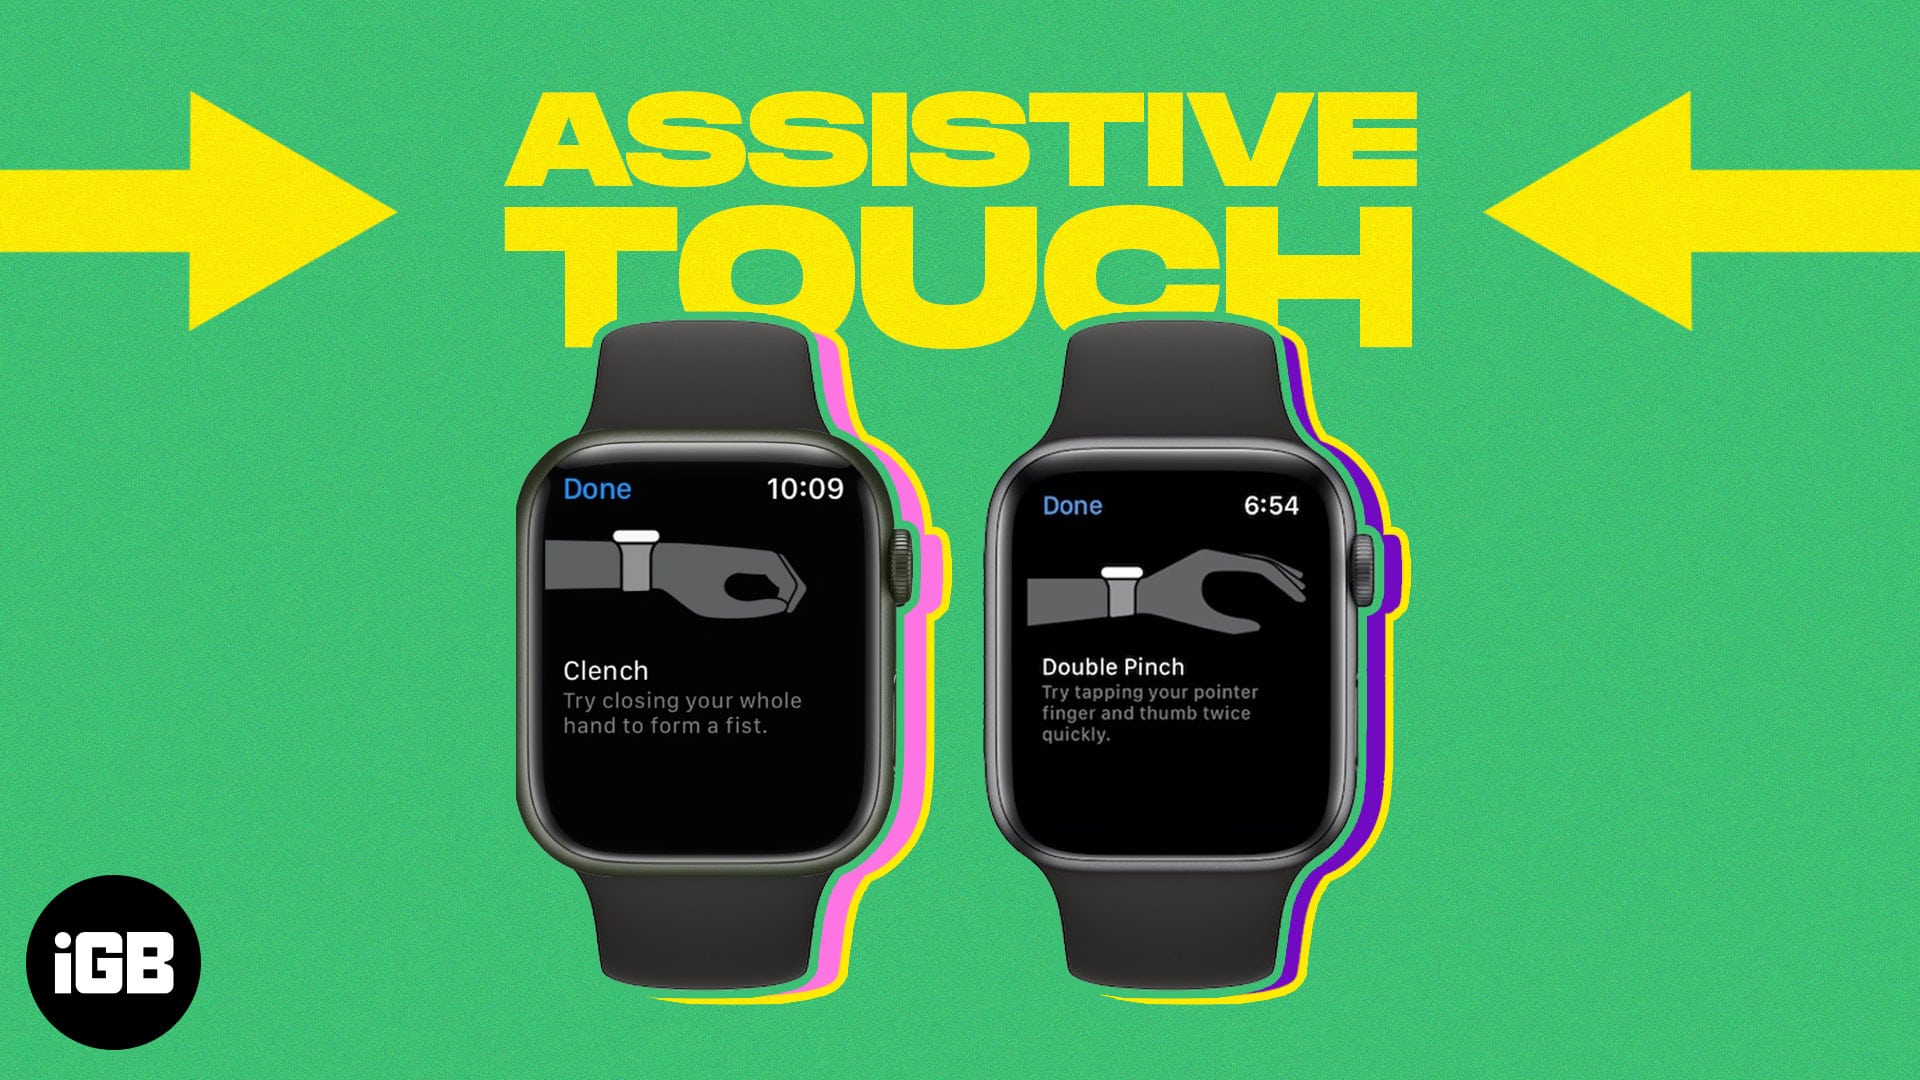 How to use AssistiveTouch on Apple Watch